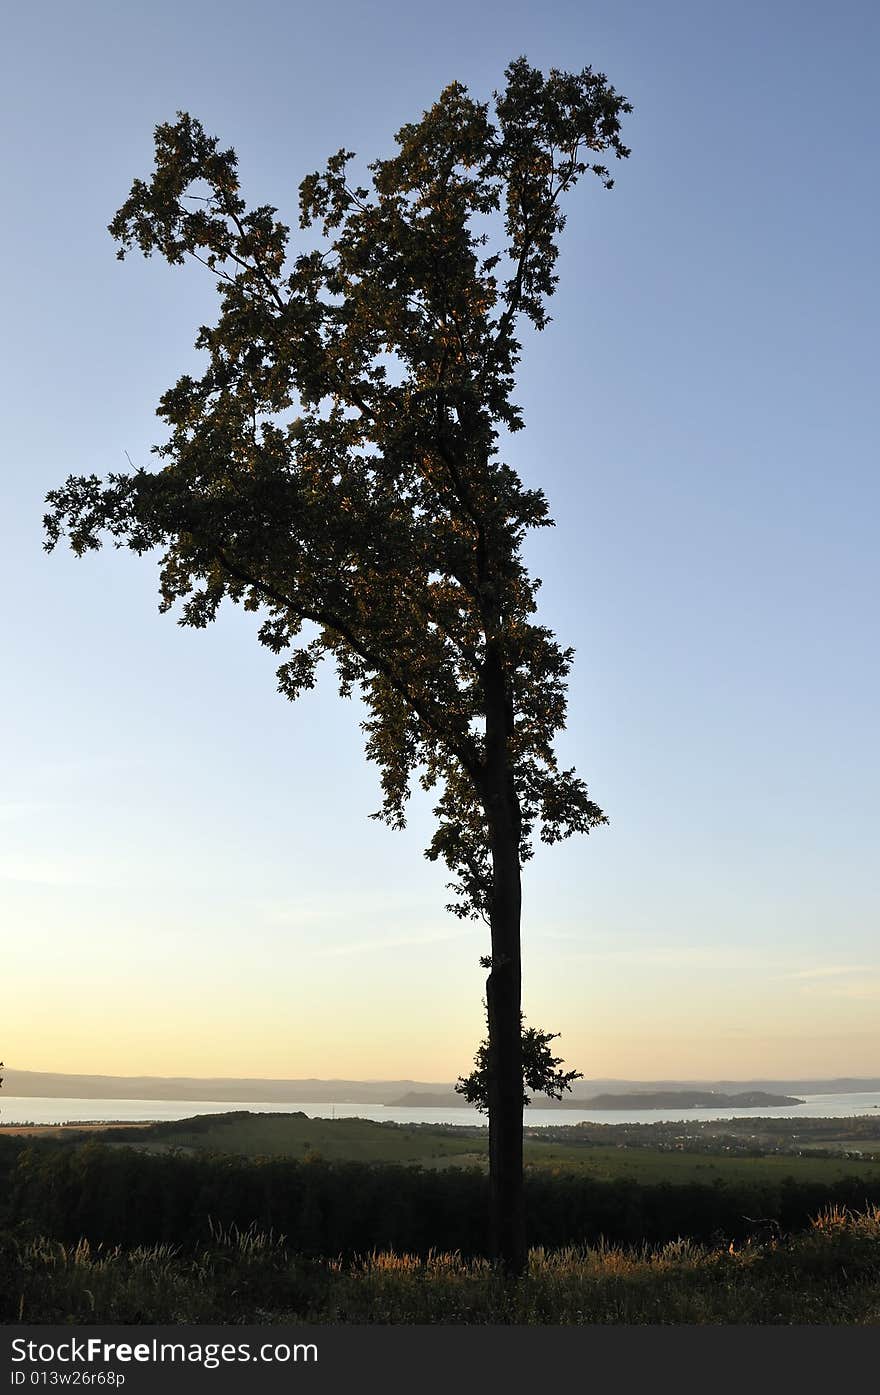 Large tree silhouette at dusk with a lake in the background